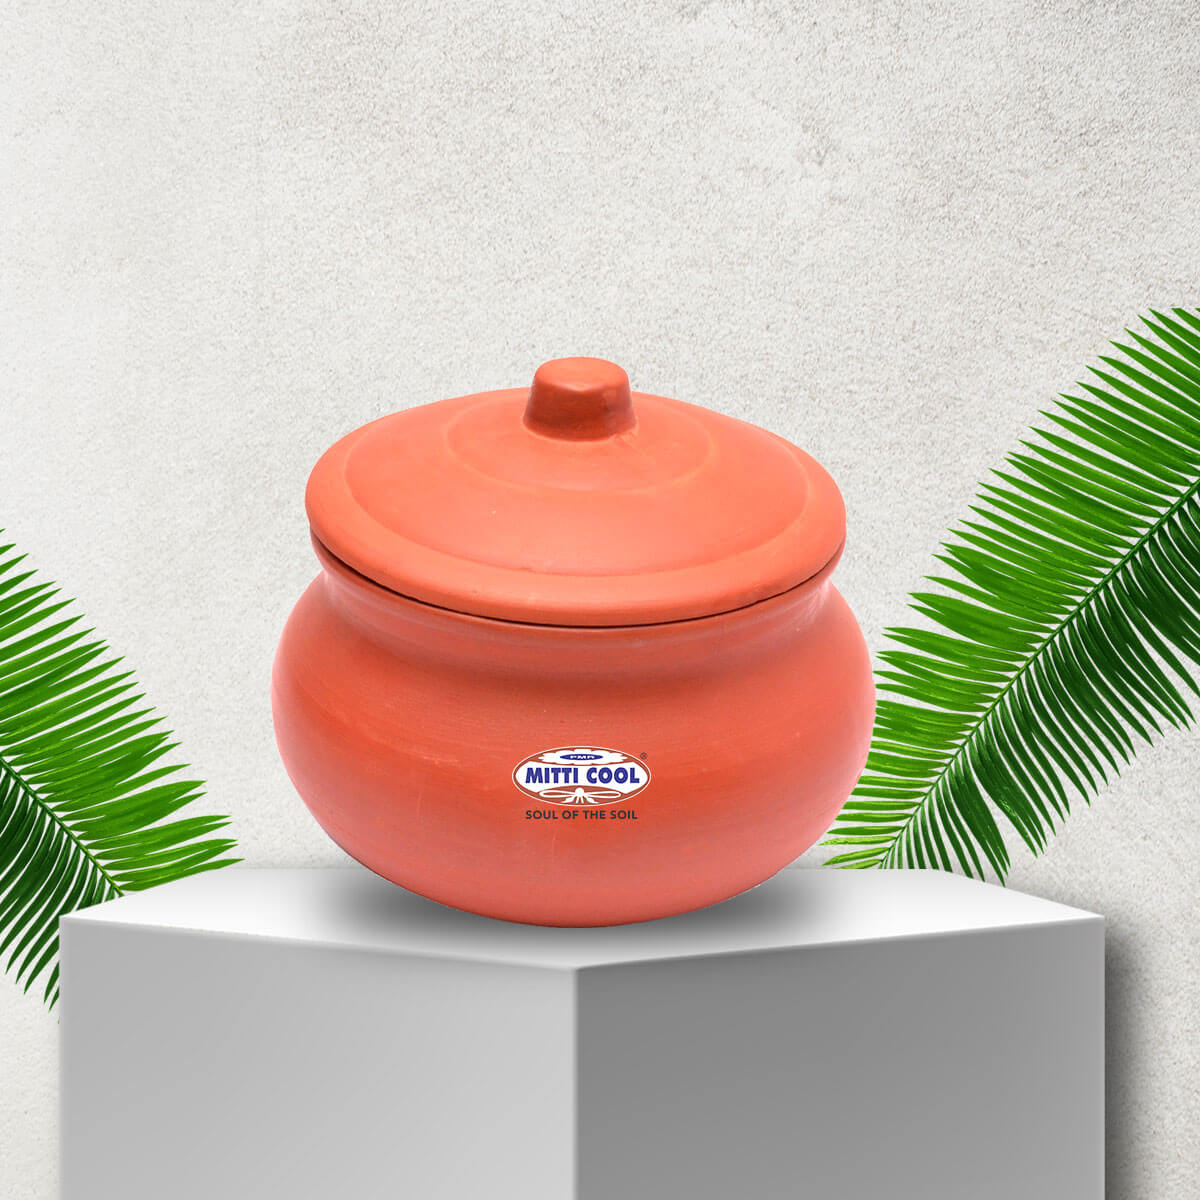 Brown, 1000 ml Details about   Mitti Cool Terracotta Clay Curd Pots Dahi handi/Bowl with lid 